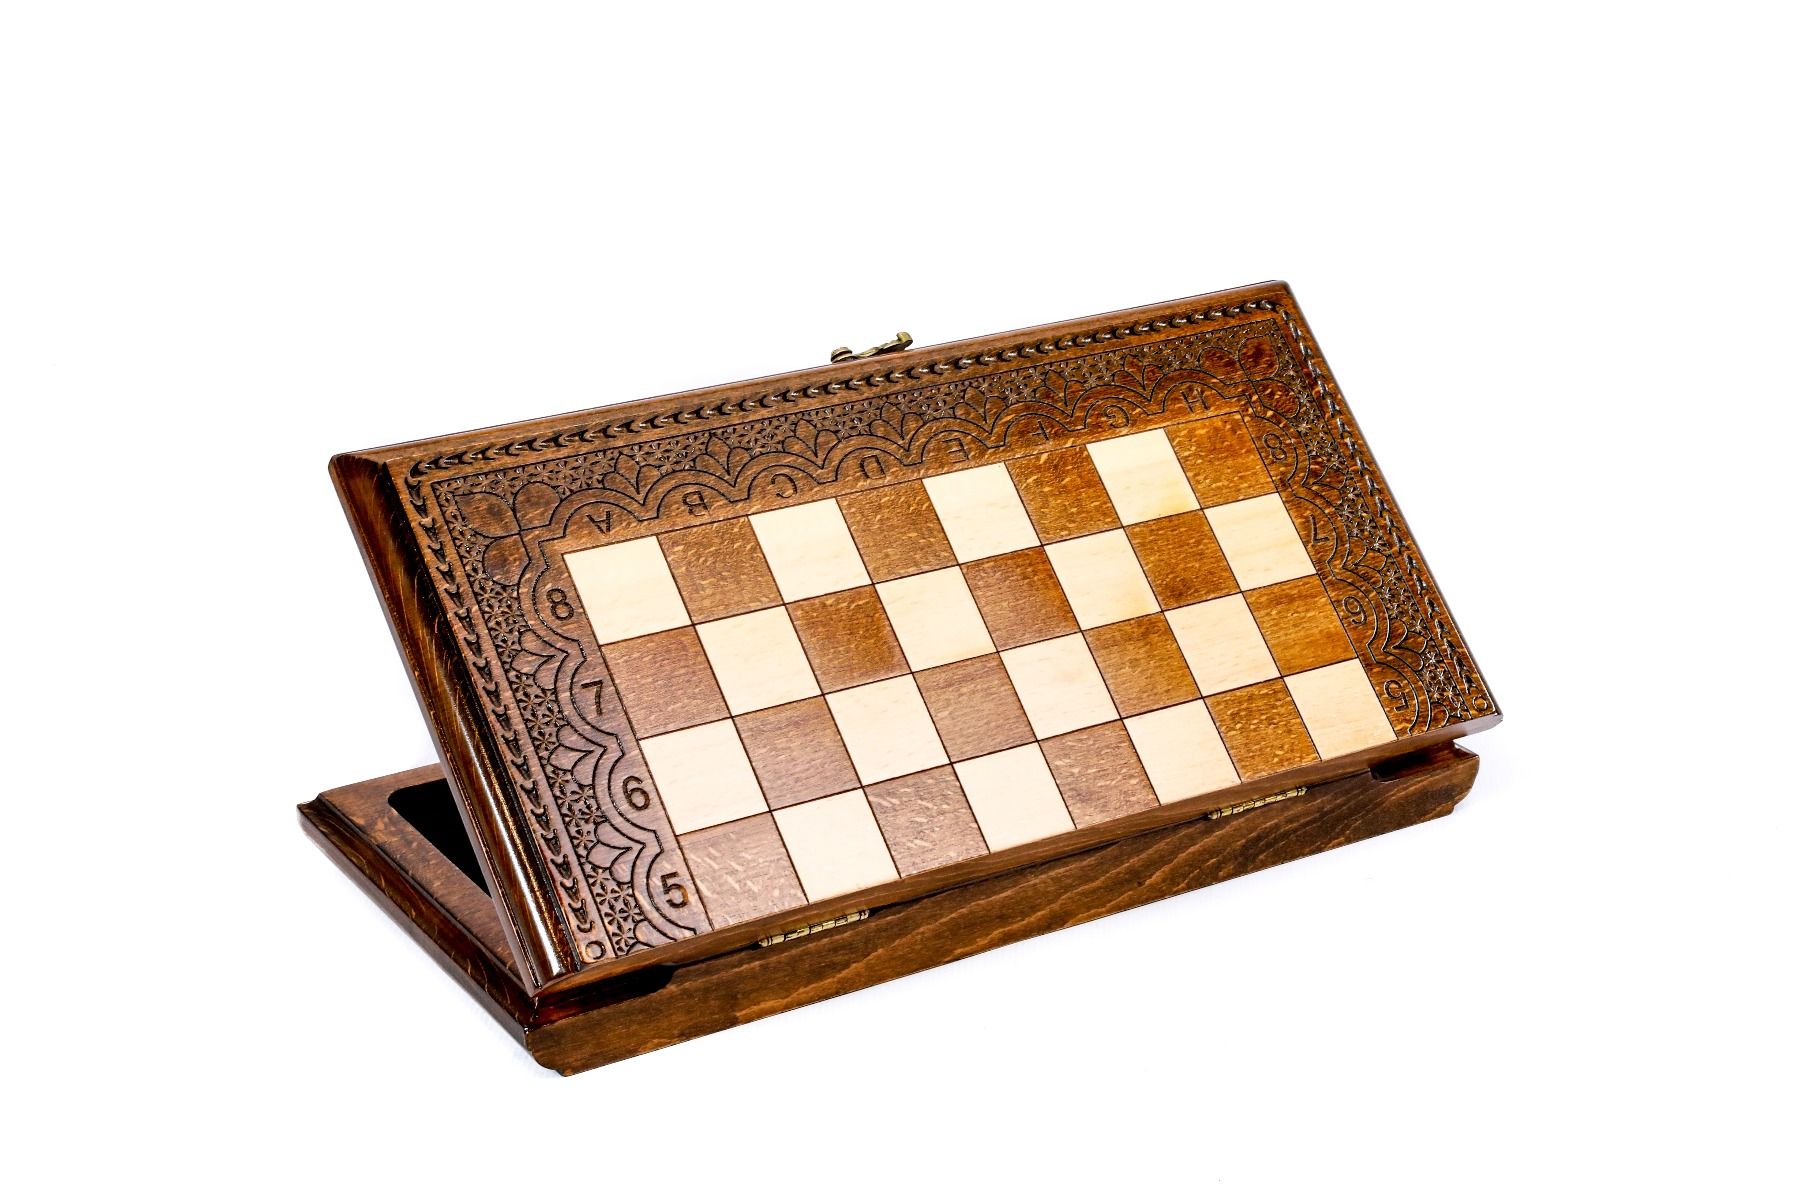 Engage in the art of strategy with a wooden chess set that redefines classic elegance through innovative and unique design touches.